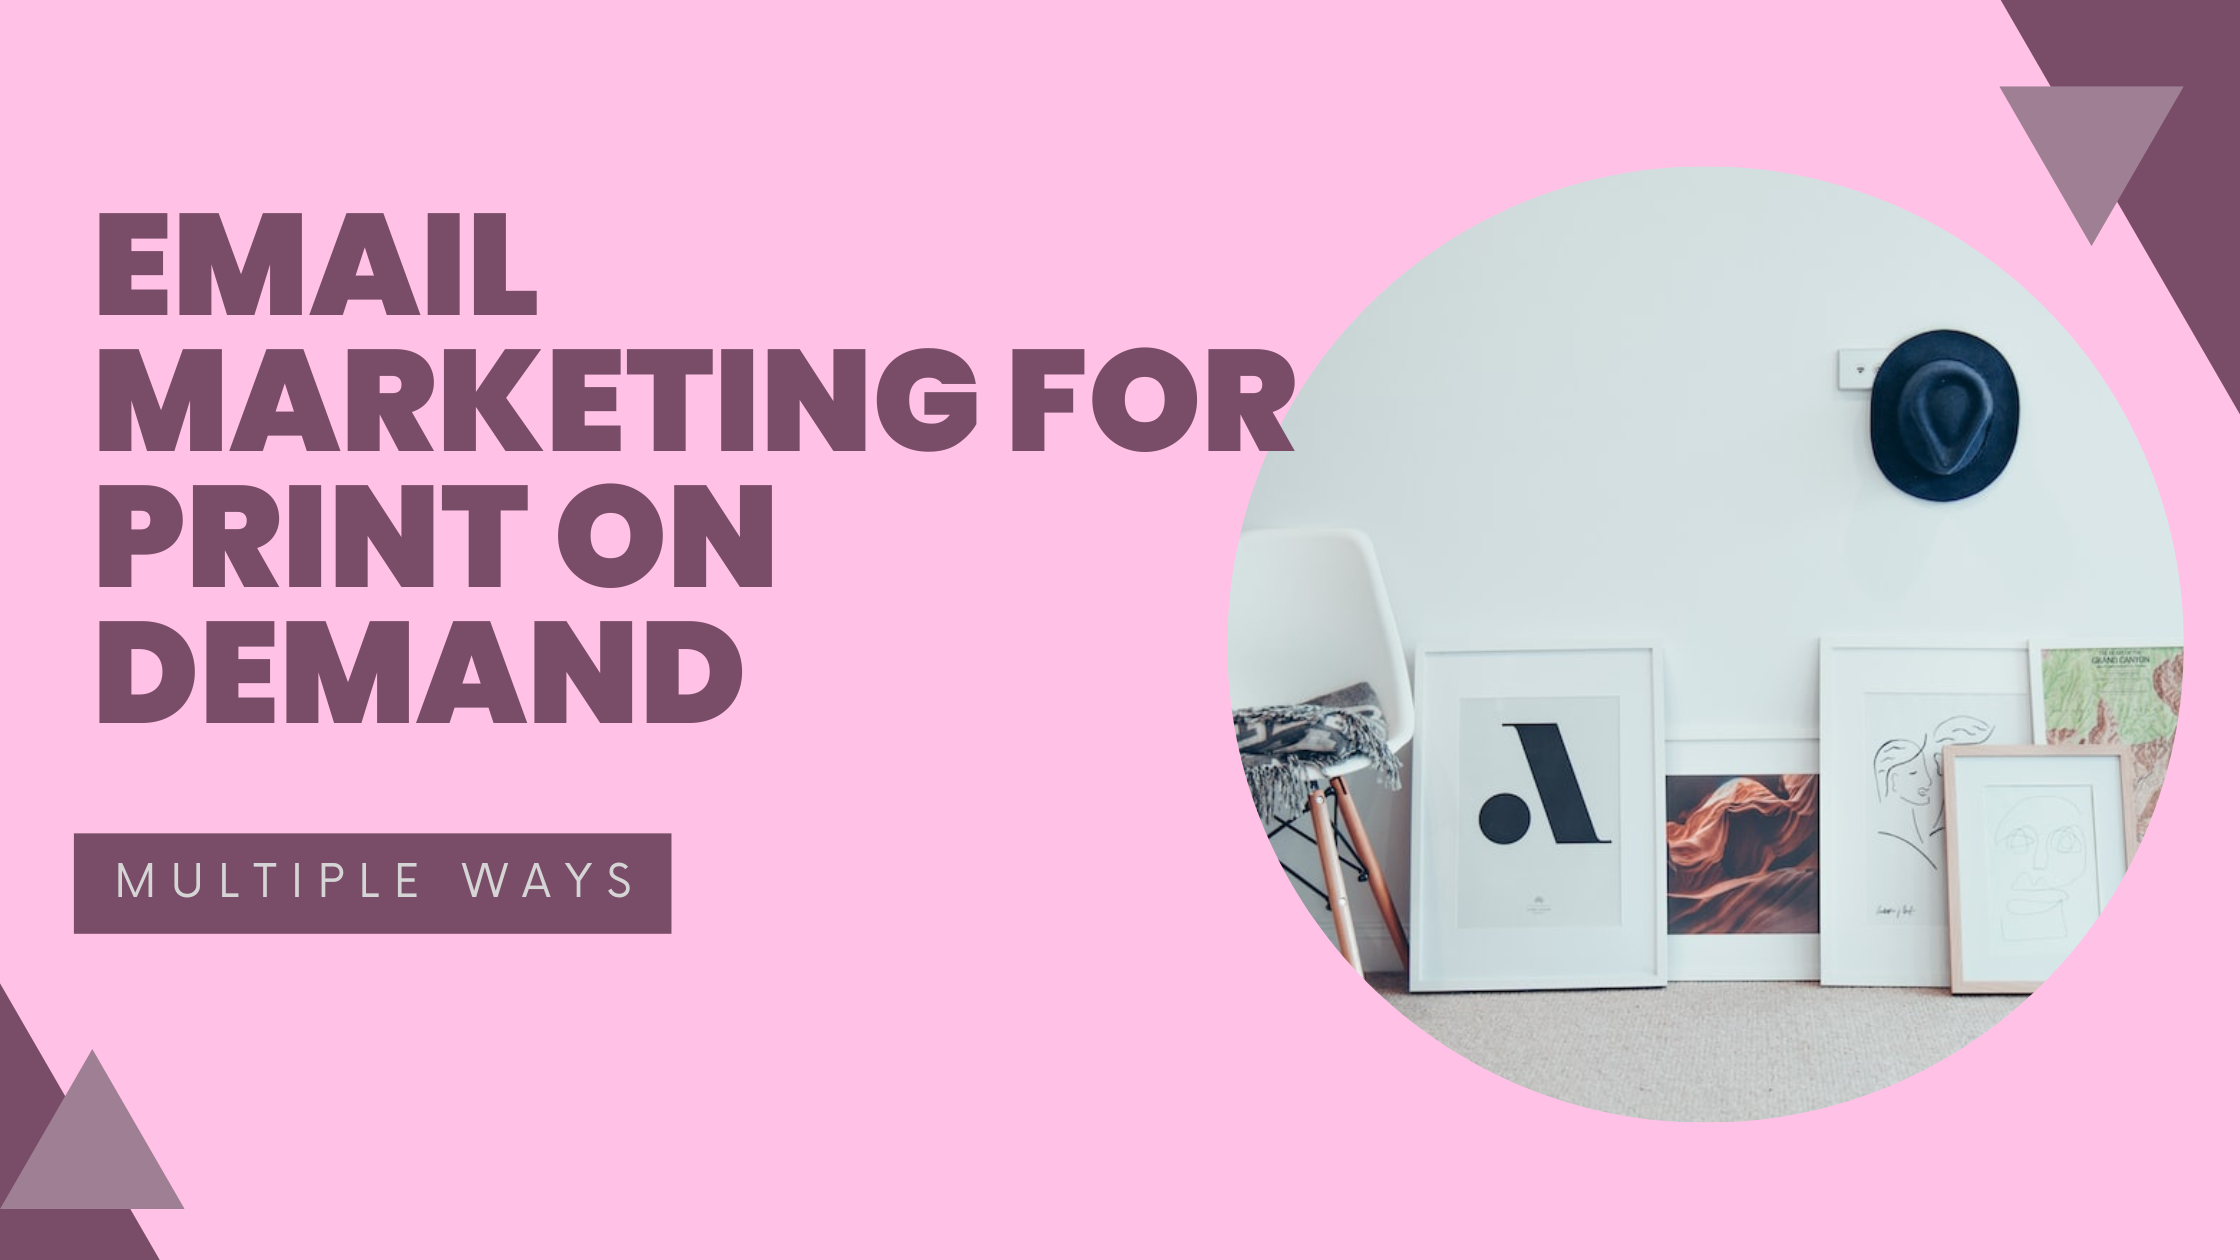 How to market your Print on Demand Business with Email marketing